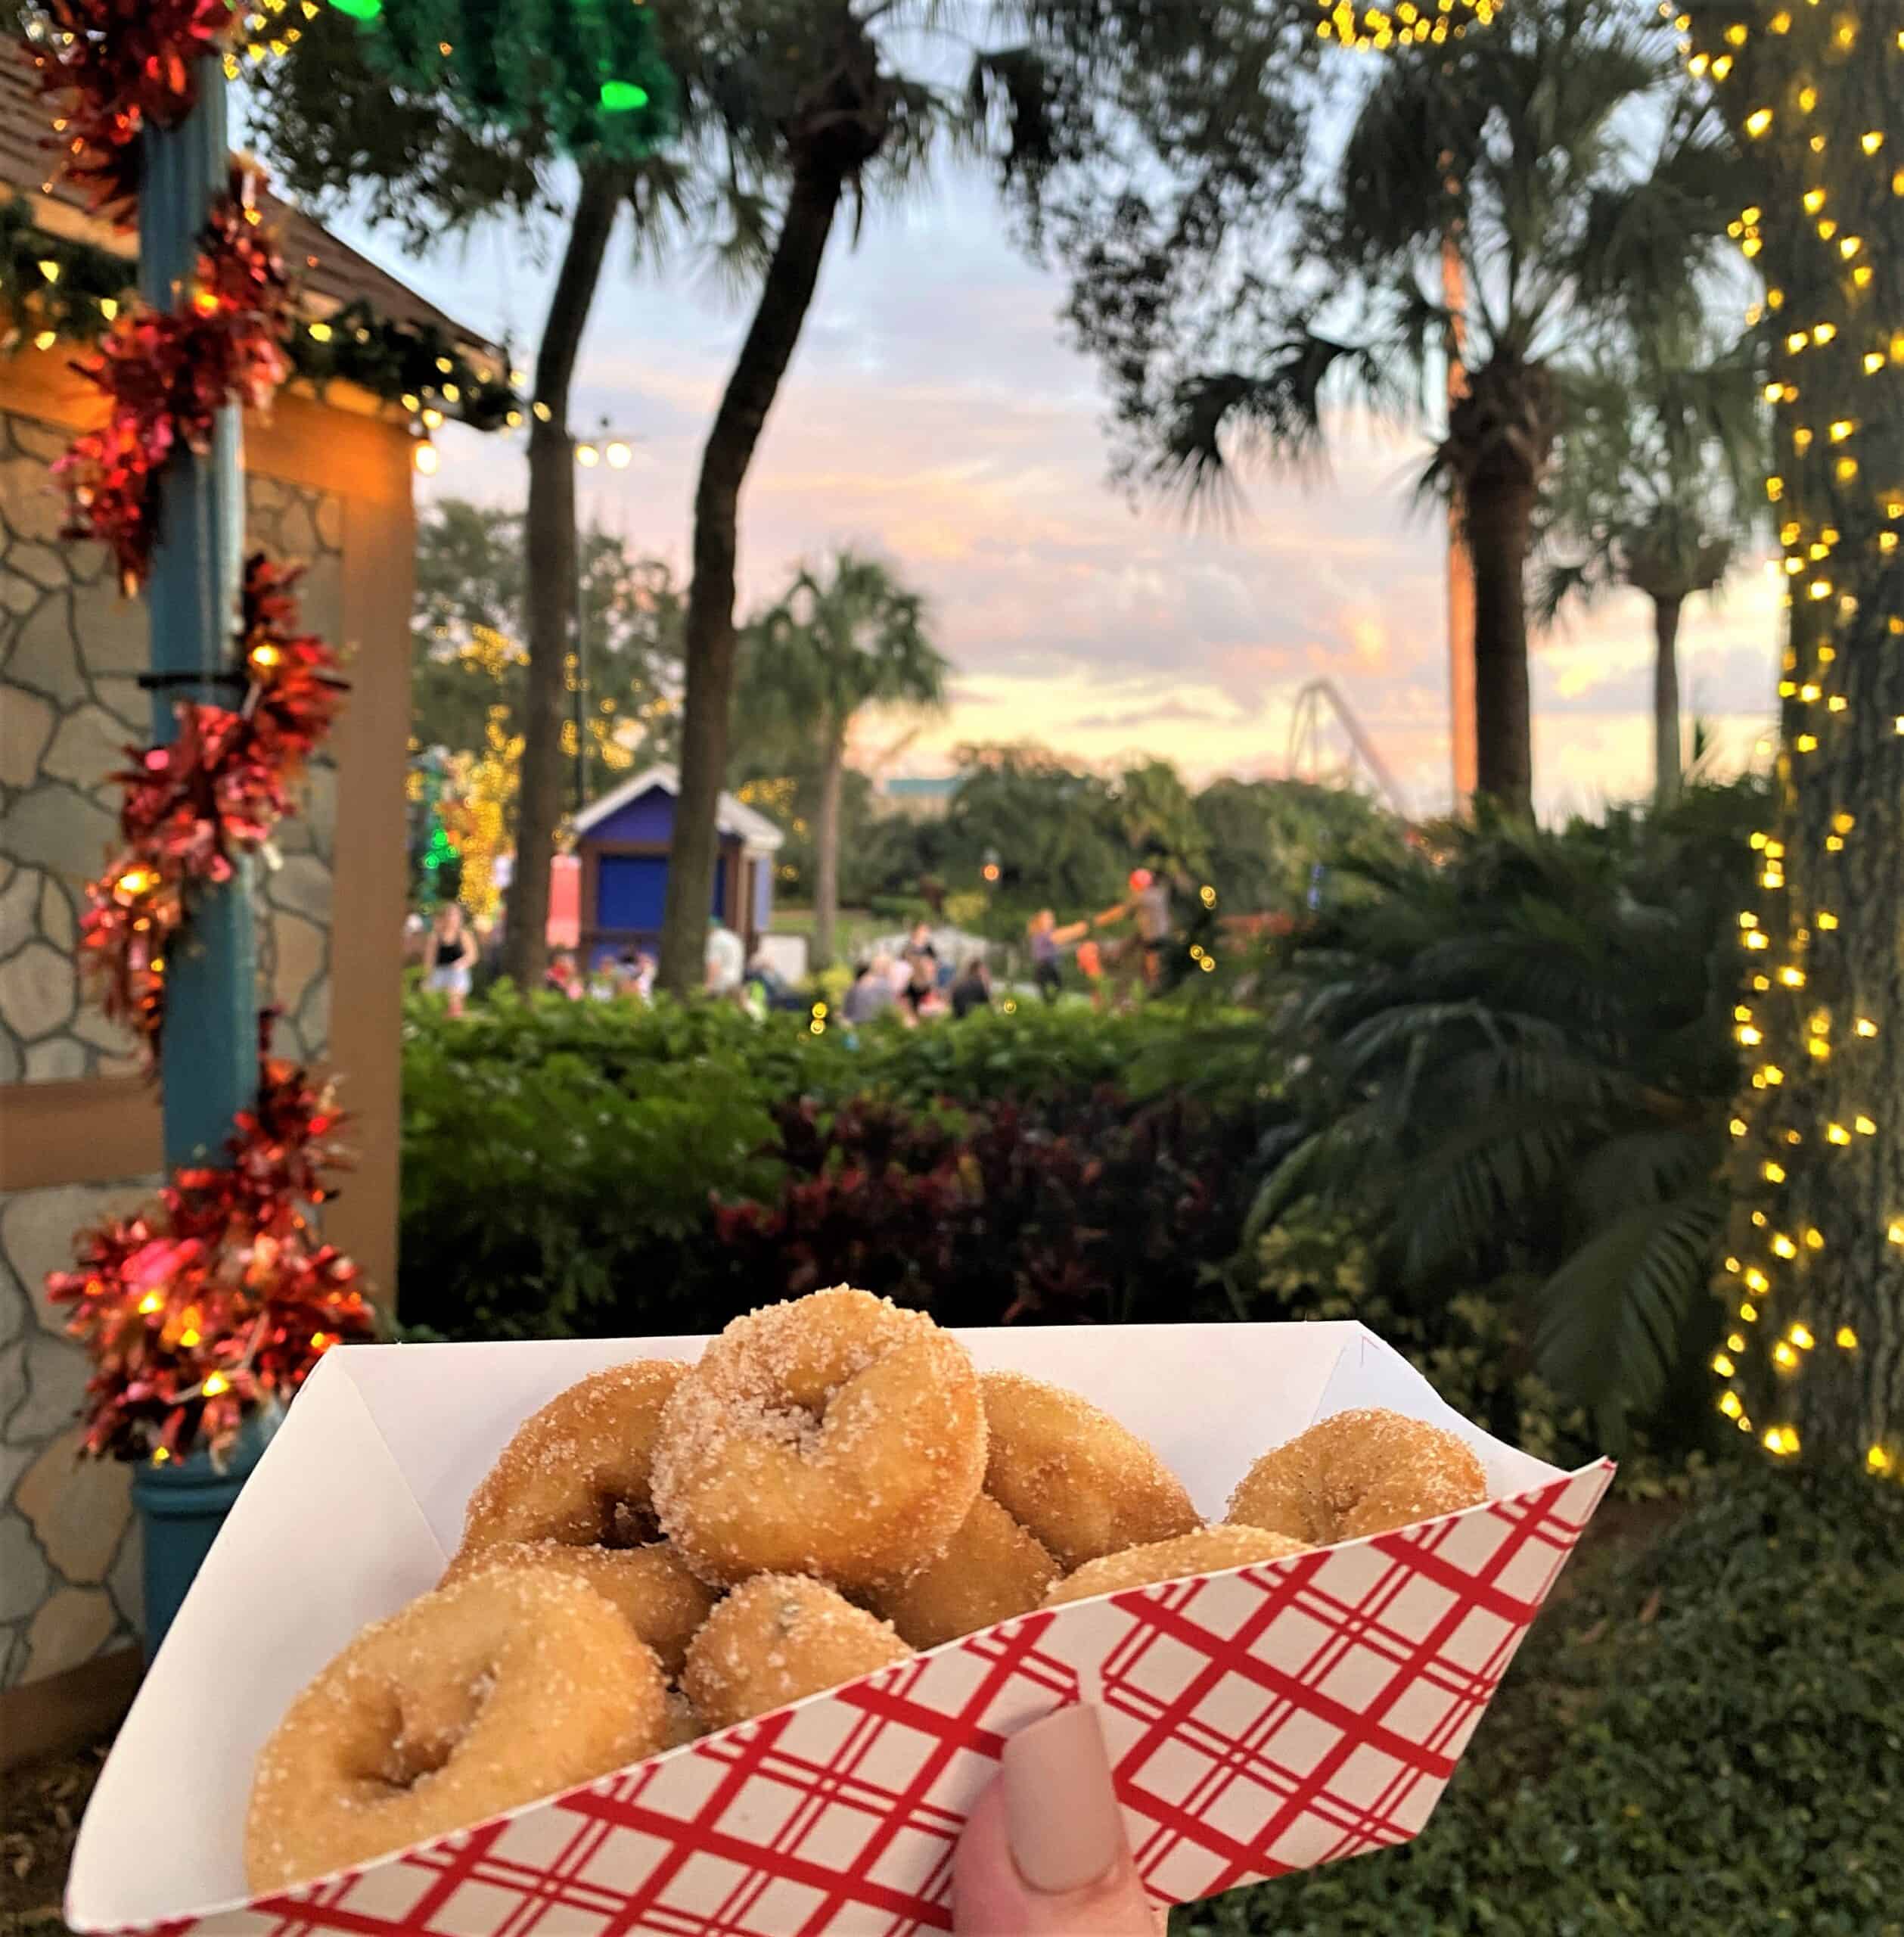 The photographer is holding a paper tray with Mini Donuts at SeaWorld Christmas Market. A sunset, some palm trees, and Christmas lights are in the background.